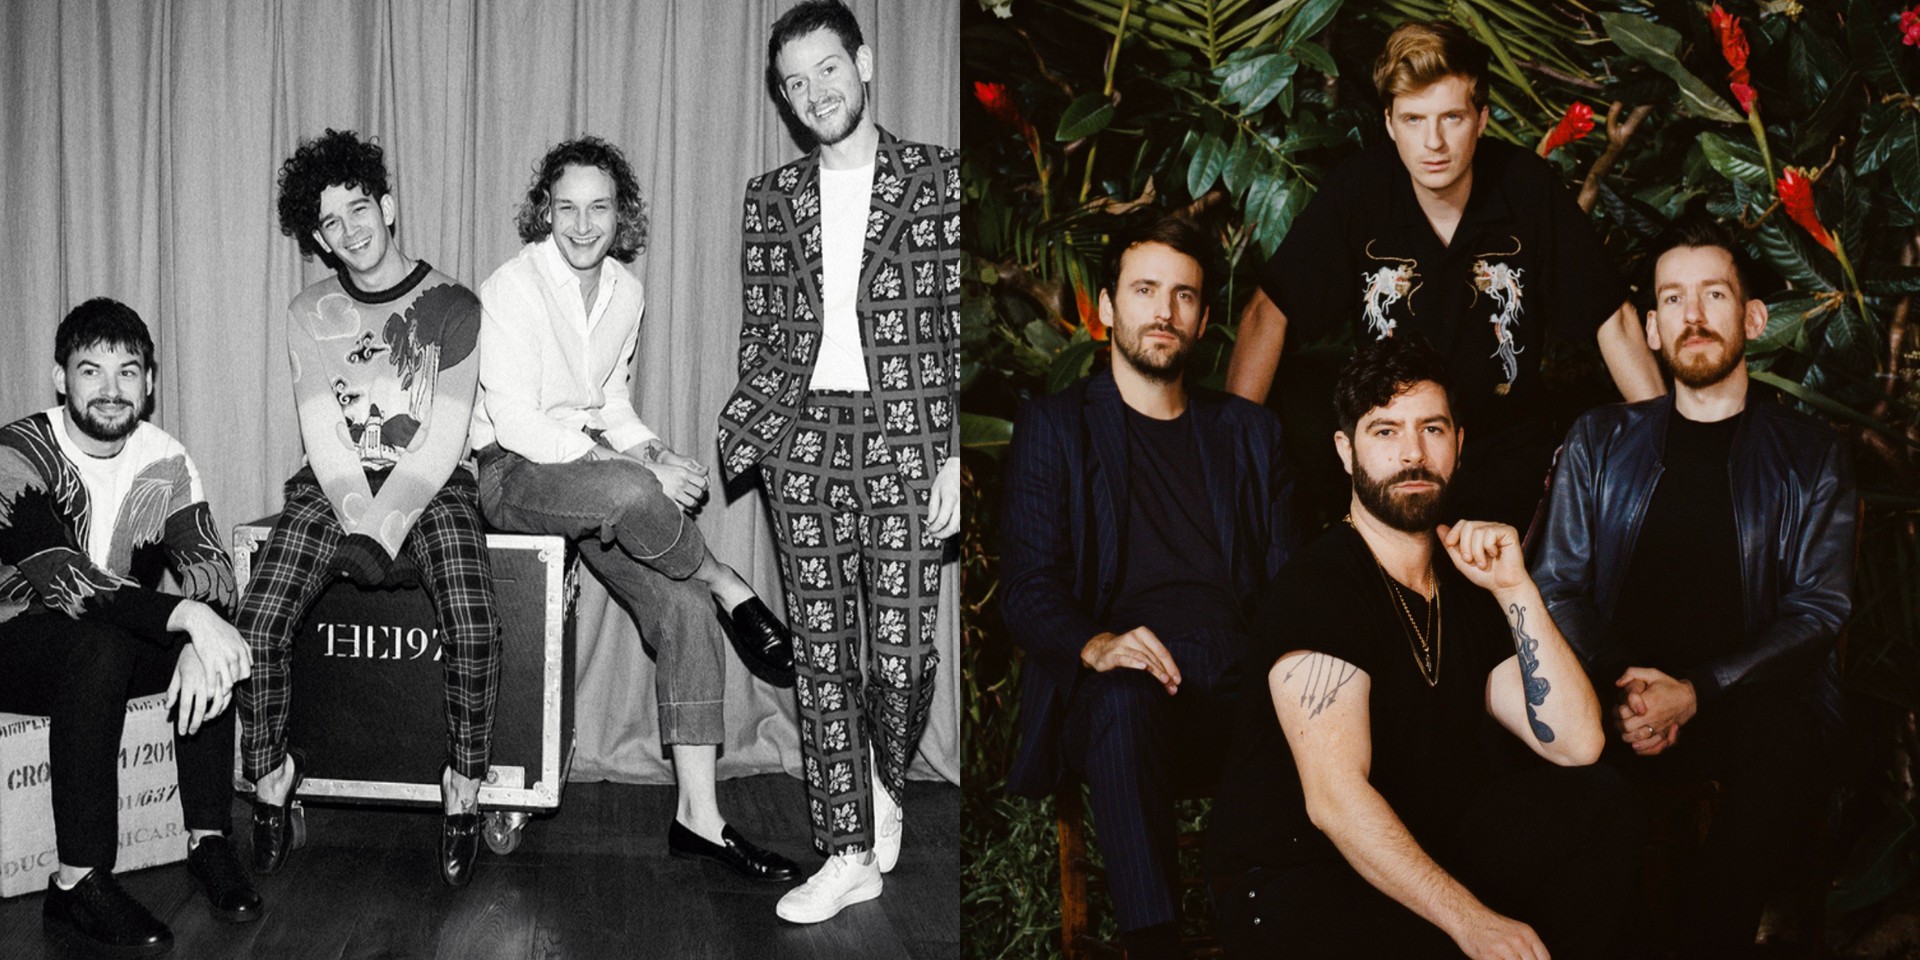 Mercury Prize 2019 shortlist announced – The 1975, Foals, slowthai and more 